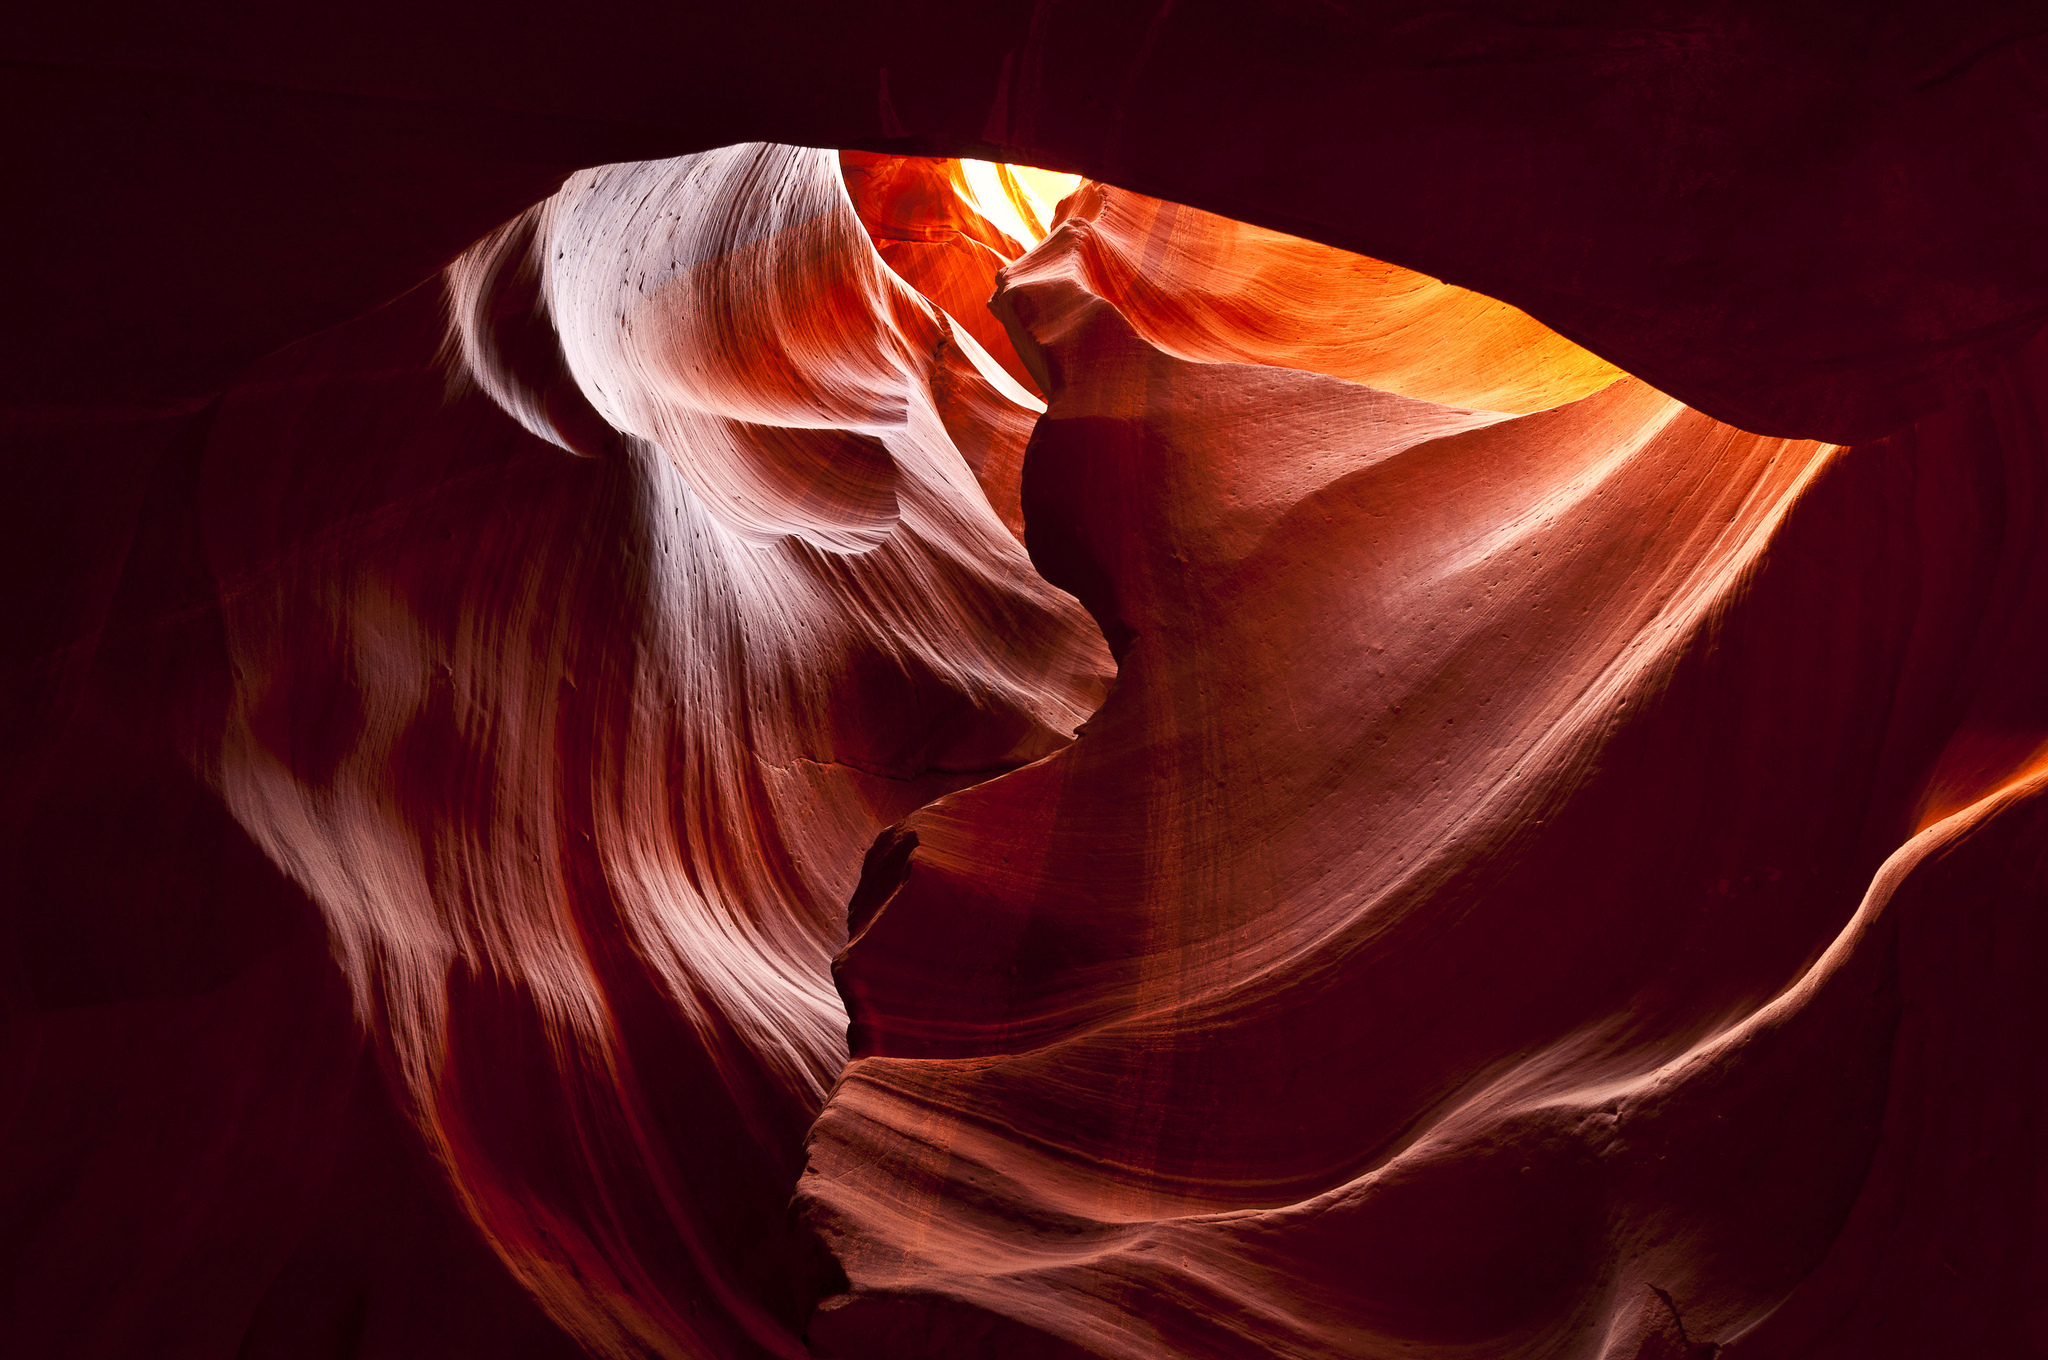 earth, antelope canyon, landscape, scenic, canyons